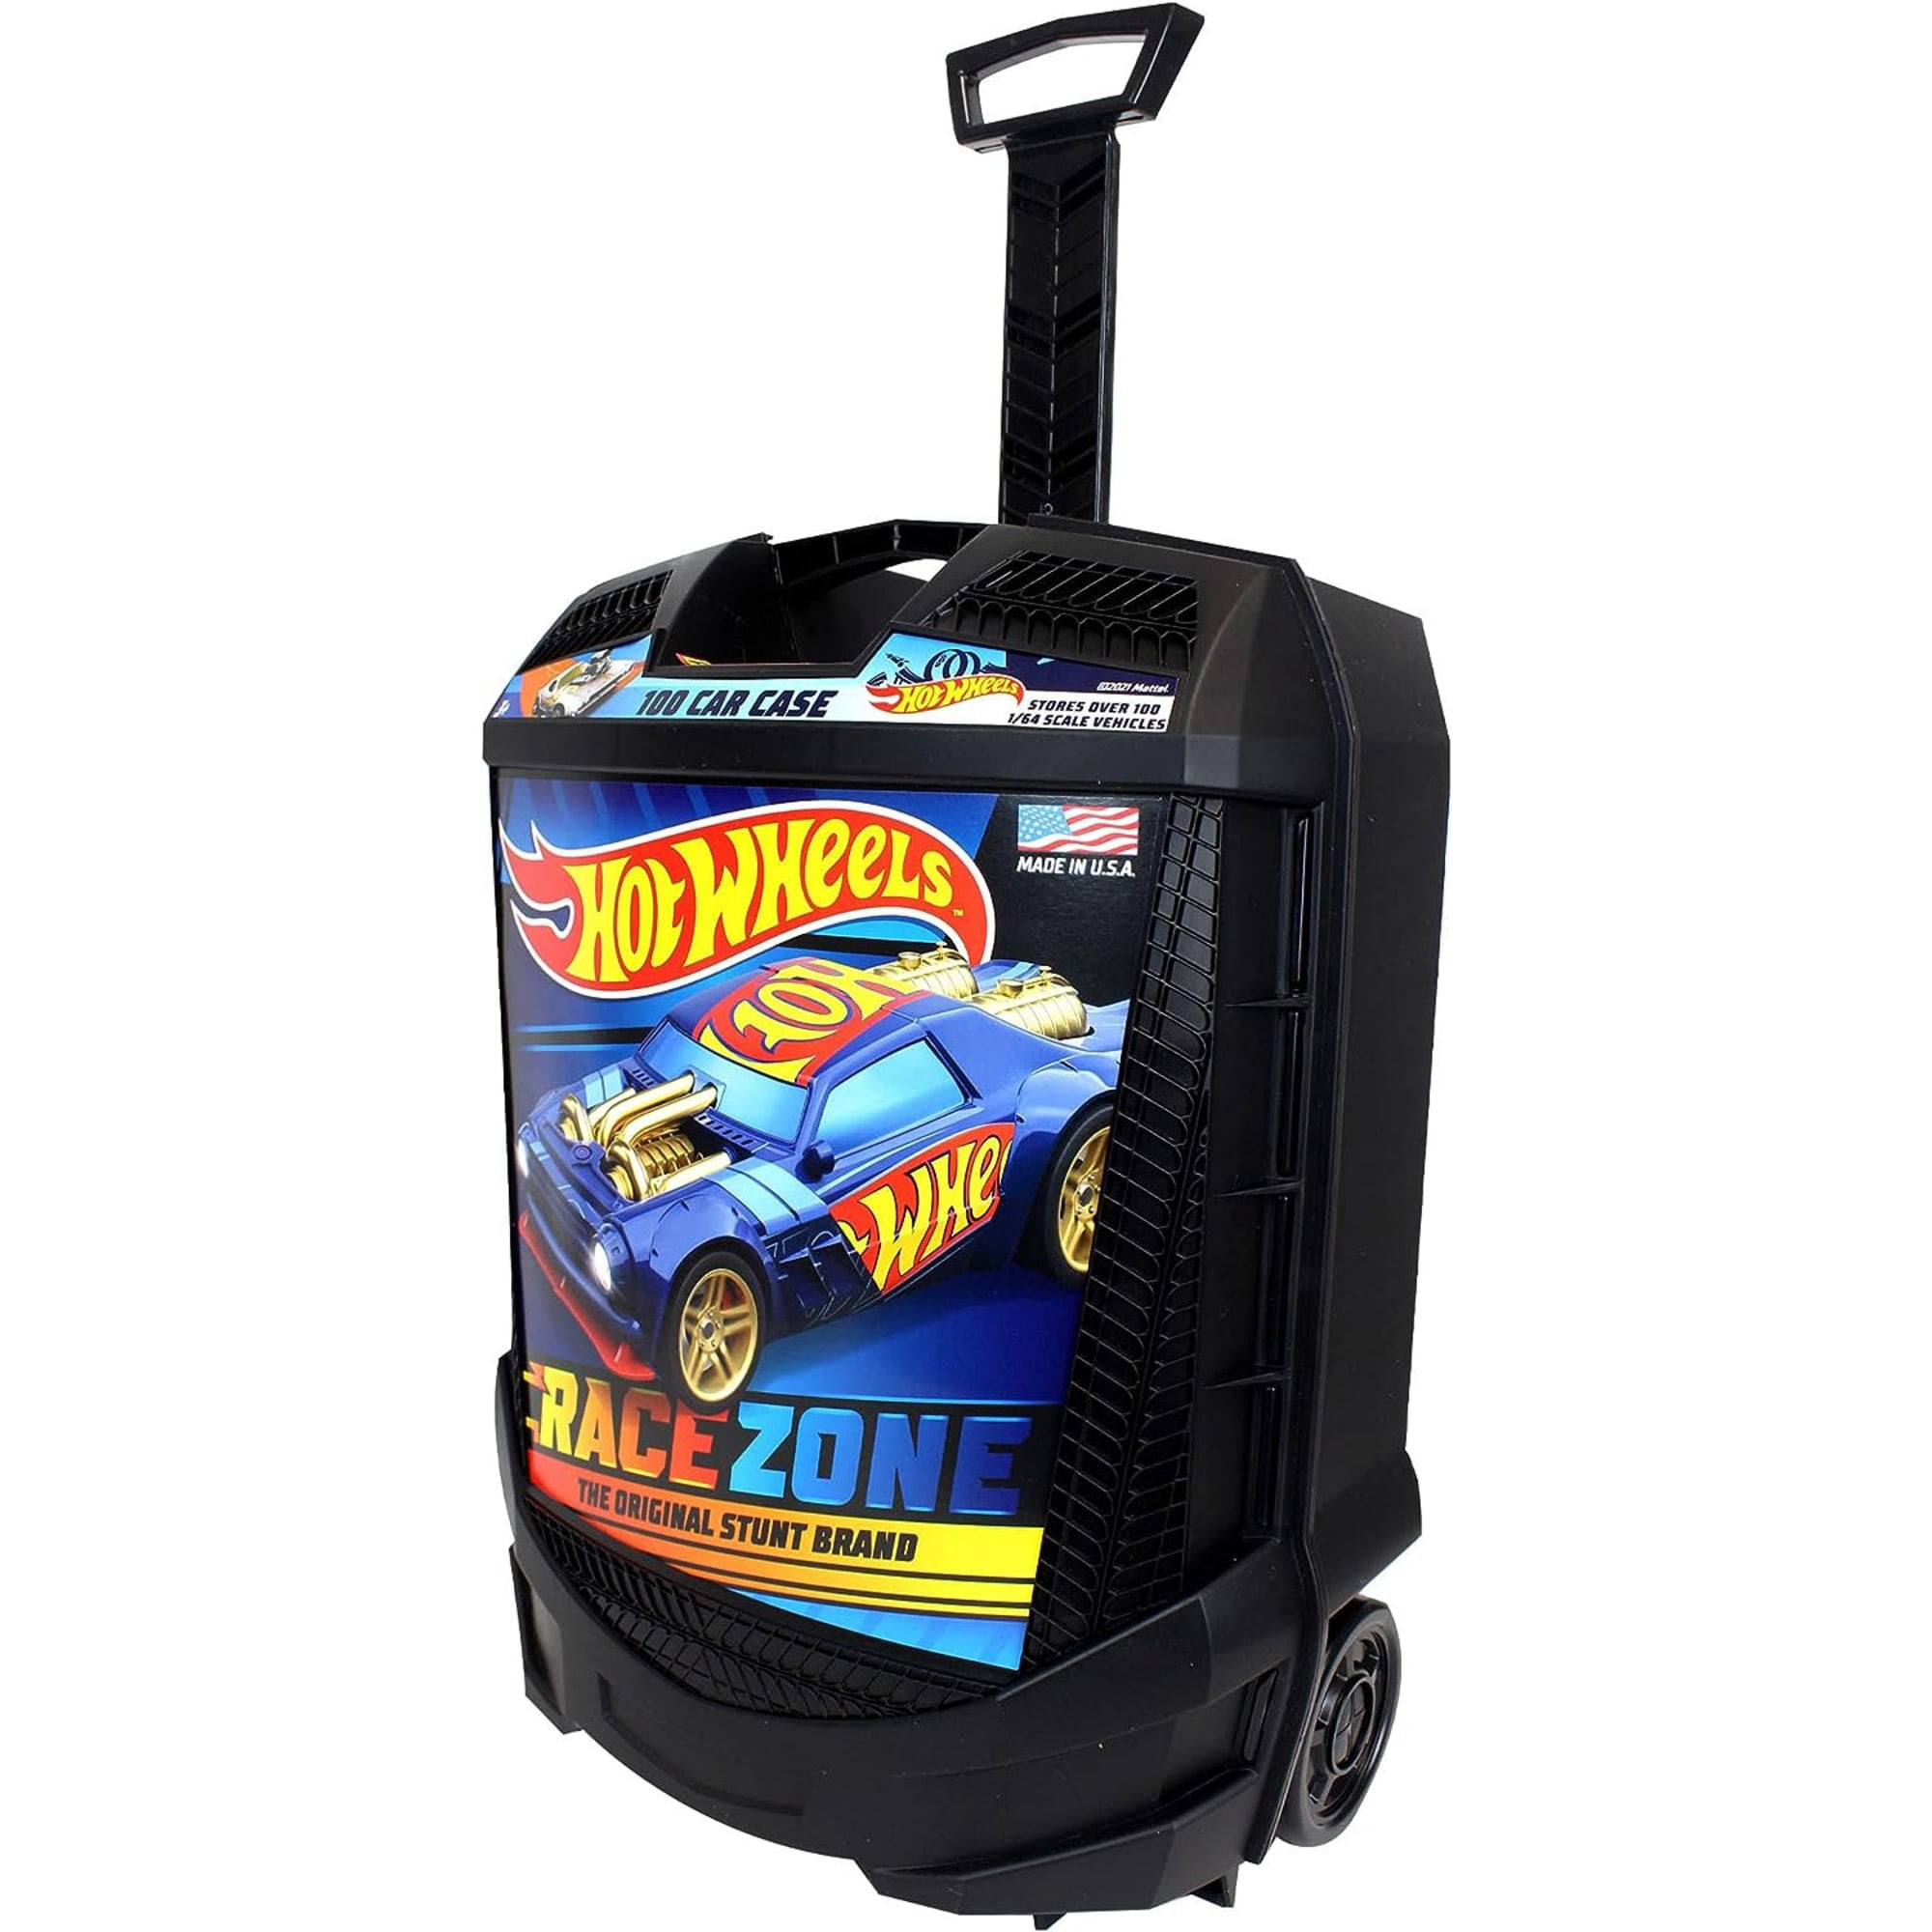 1997 Hot Wheels Carrying Case With Cars From 1970's To 1990's. 59 Cars